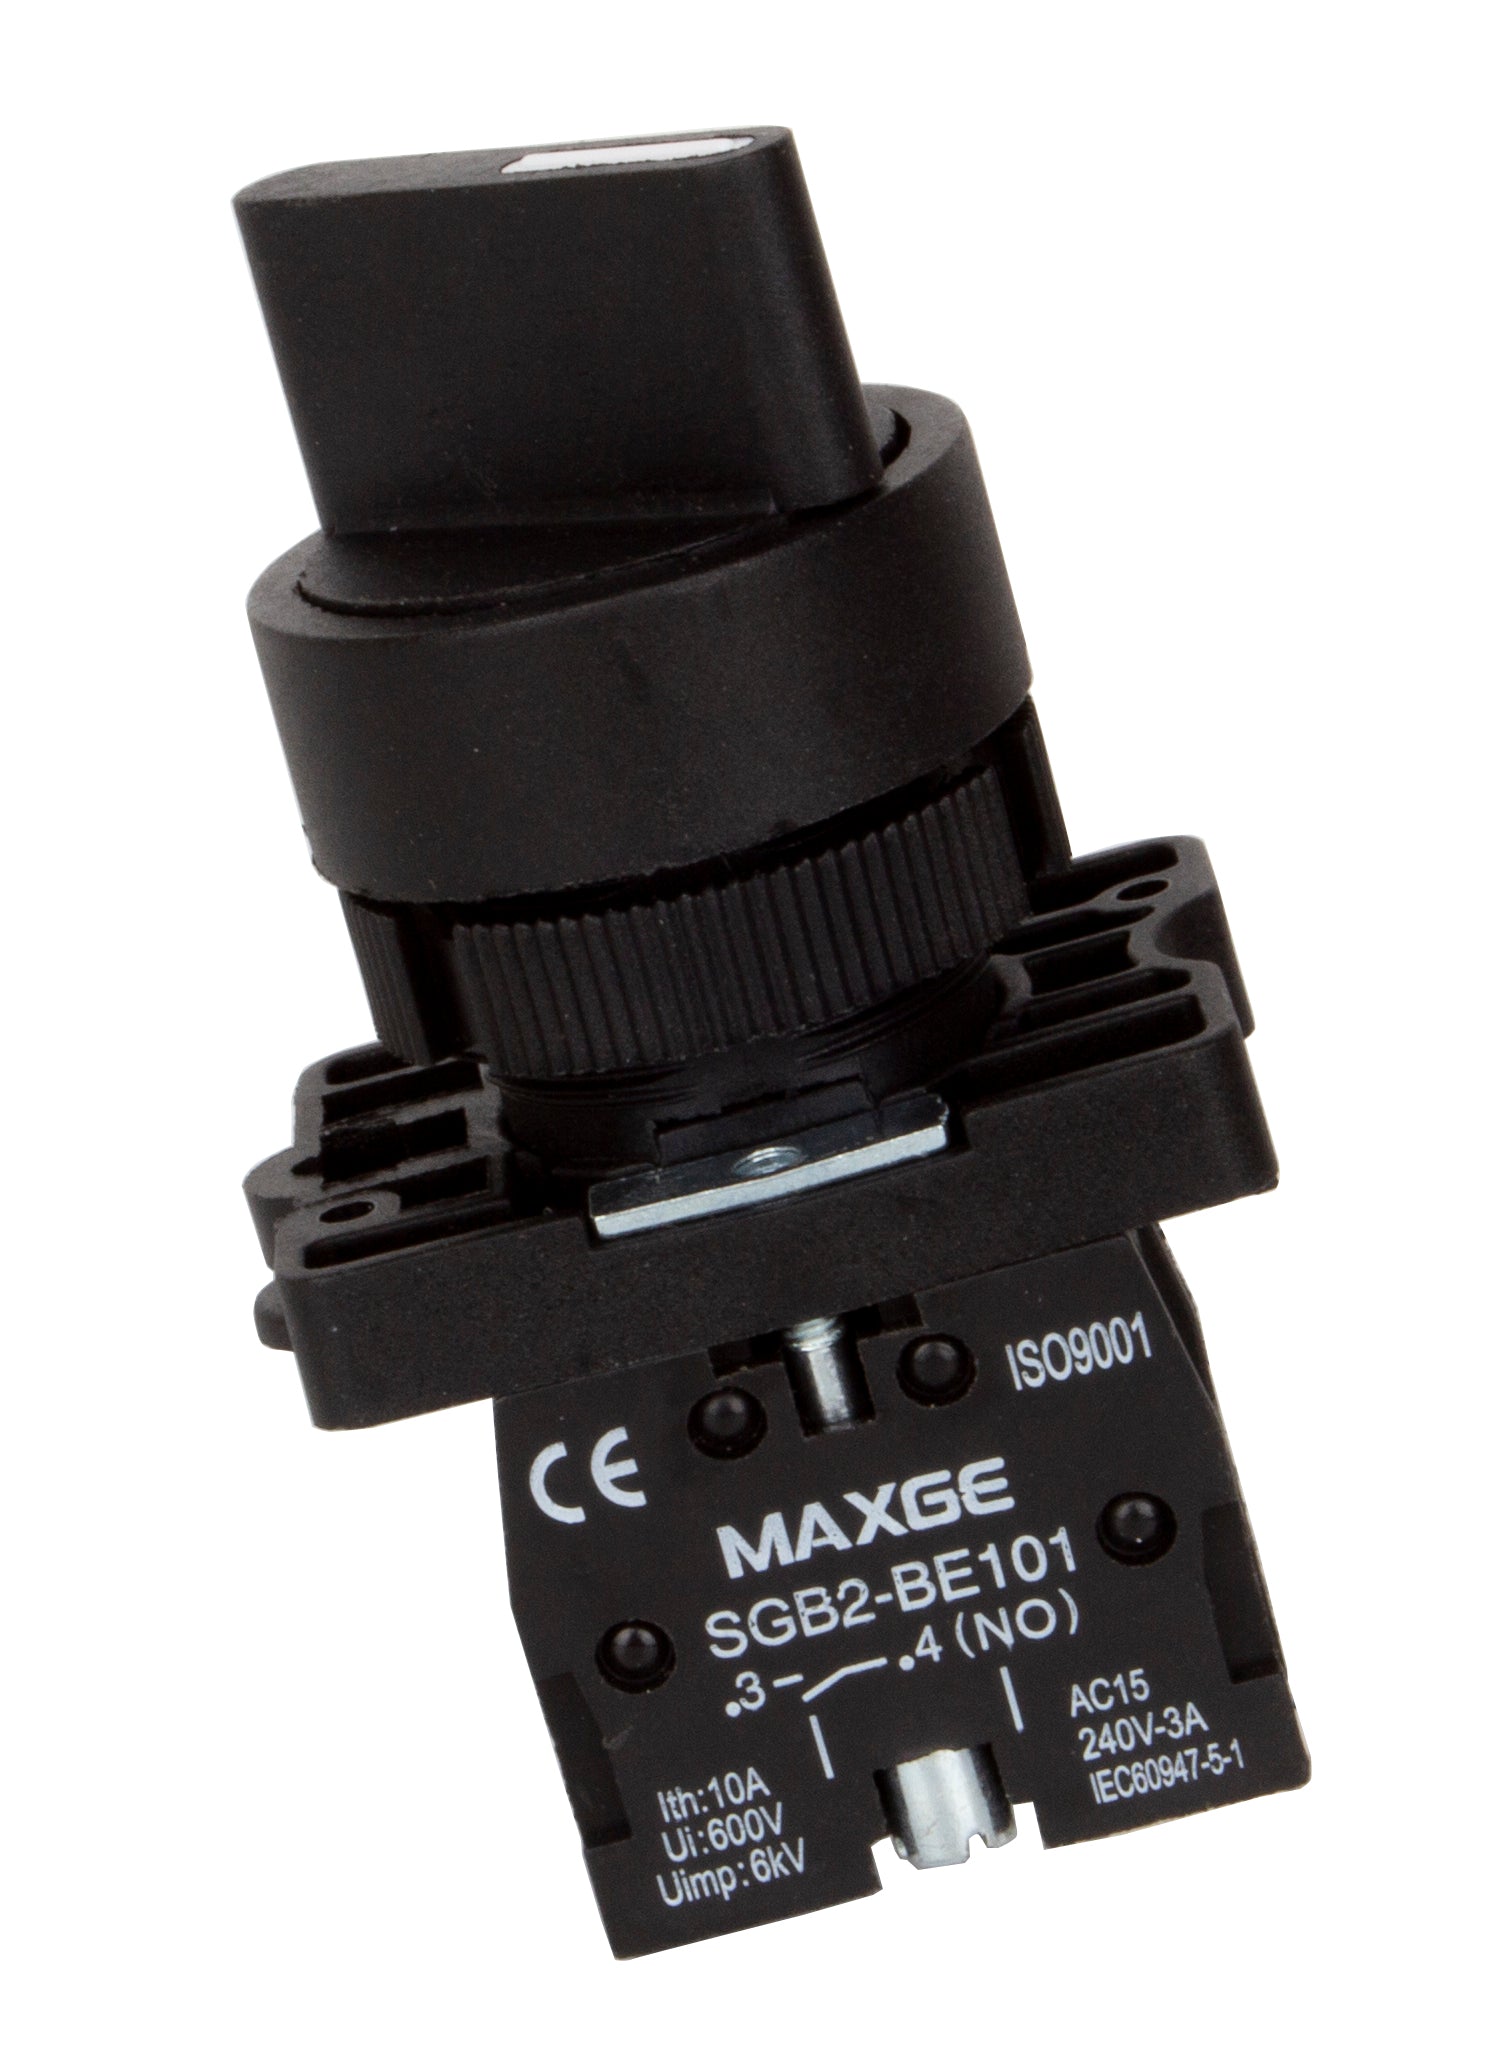 TRB-BD73-IP65, 2 x NO, 3 Position Toggle Switch BLACK, Right ON, Centre = OFF, Left ON, 3 Amp @ 240VAC, Plastic/Metal, IEC60947-5-1